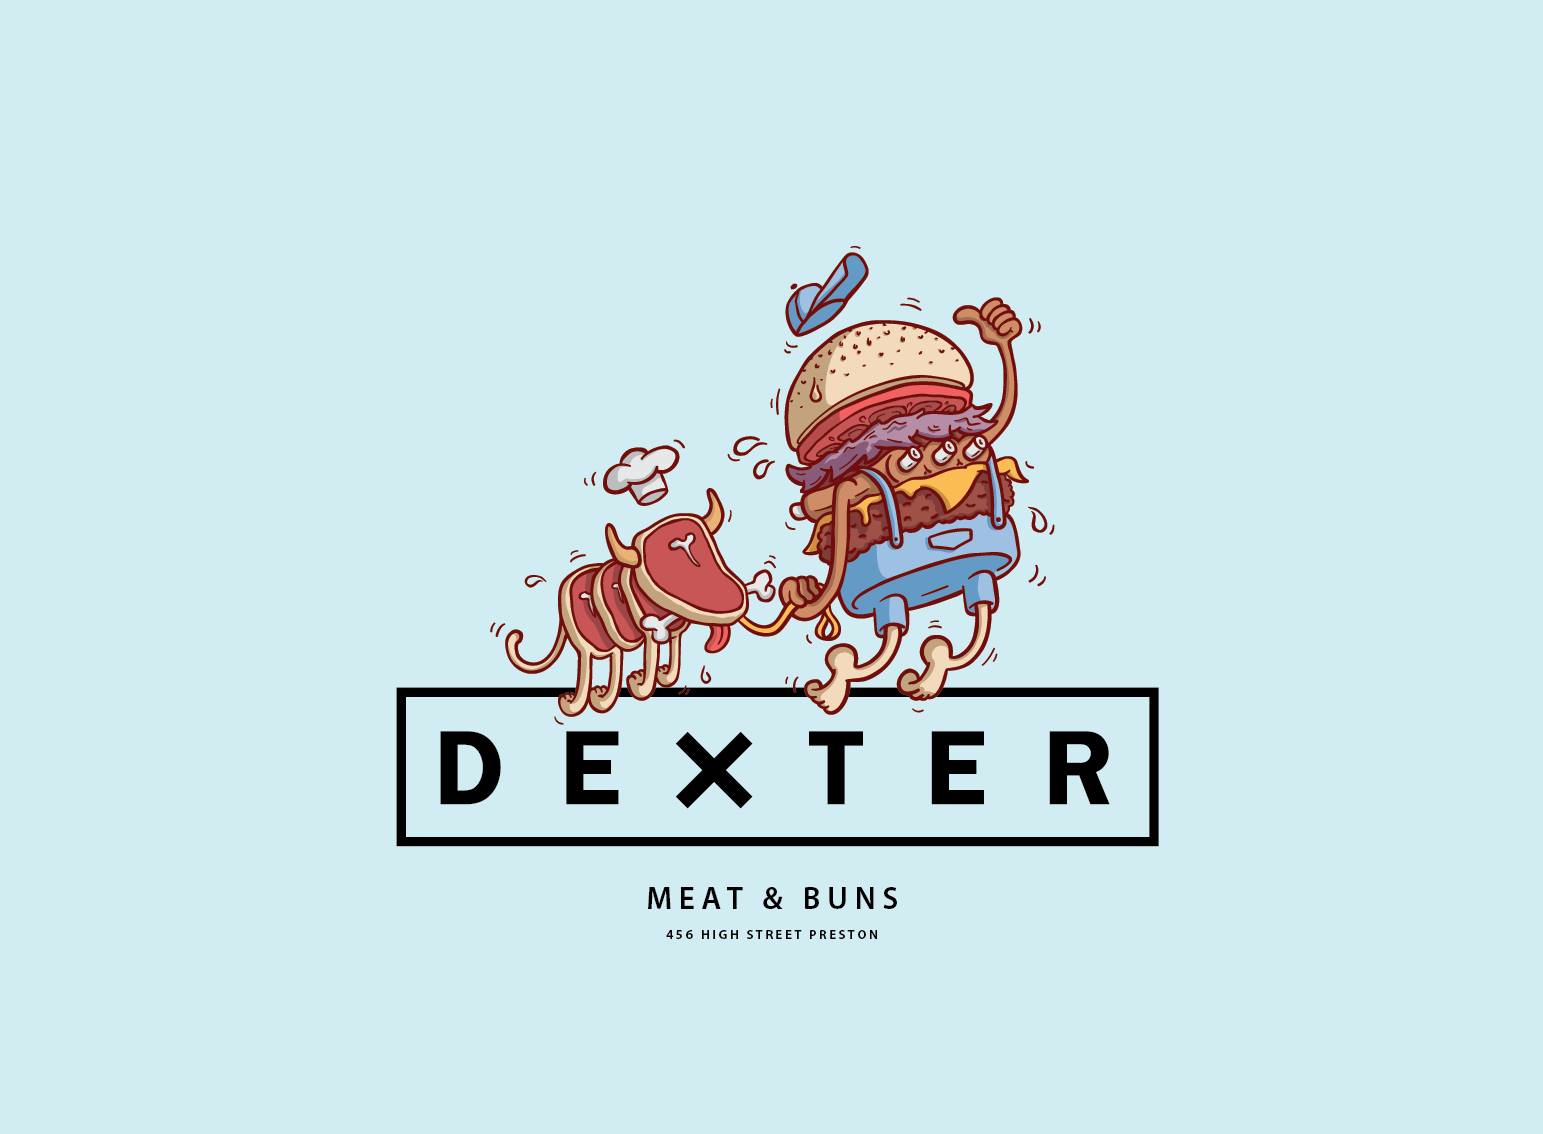 Dexter - Meat and Buns